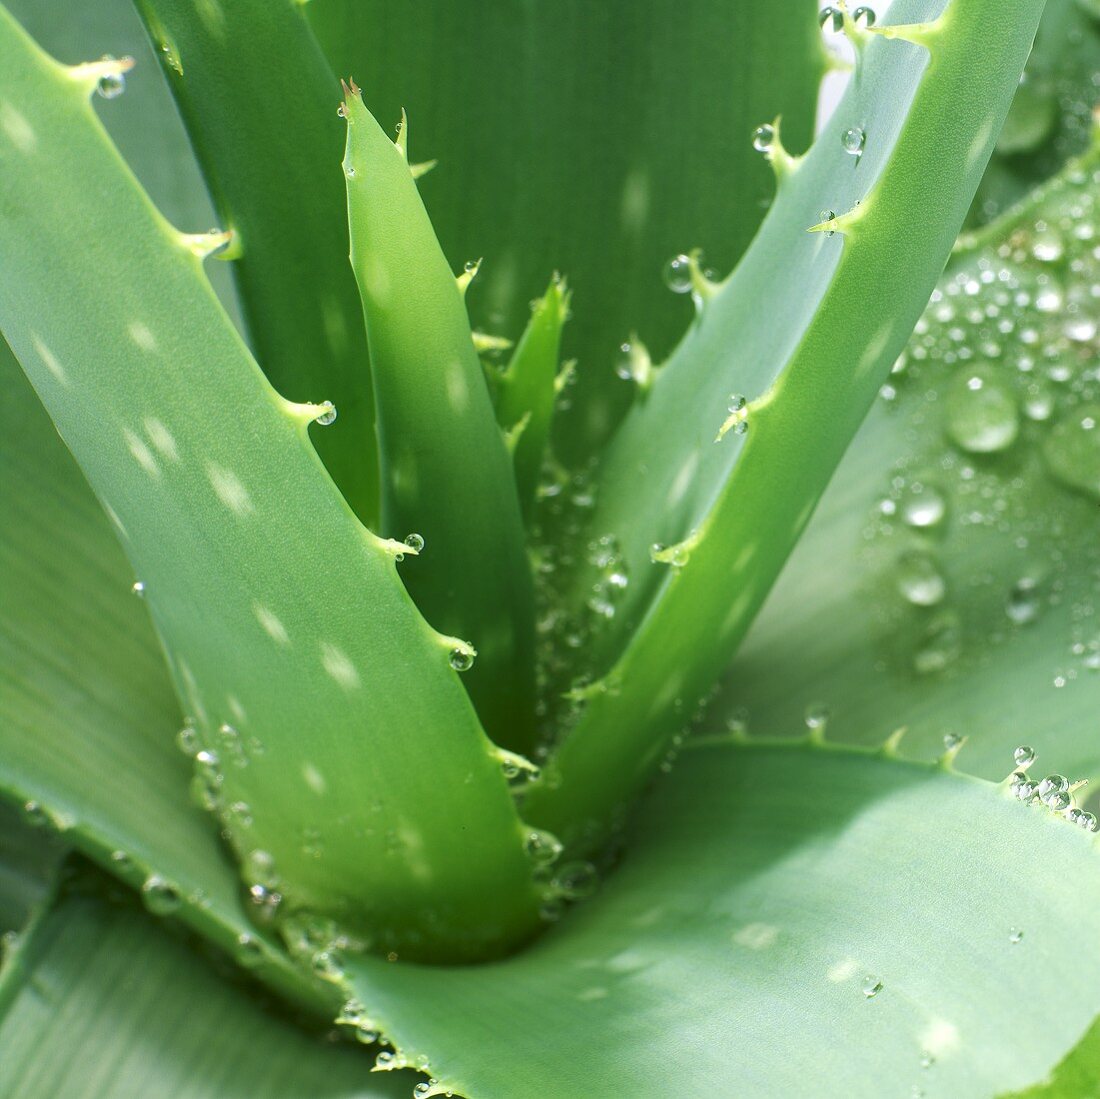 Aloe vera plant with drops of water (detail)